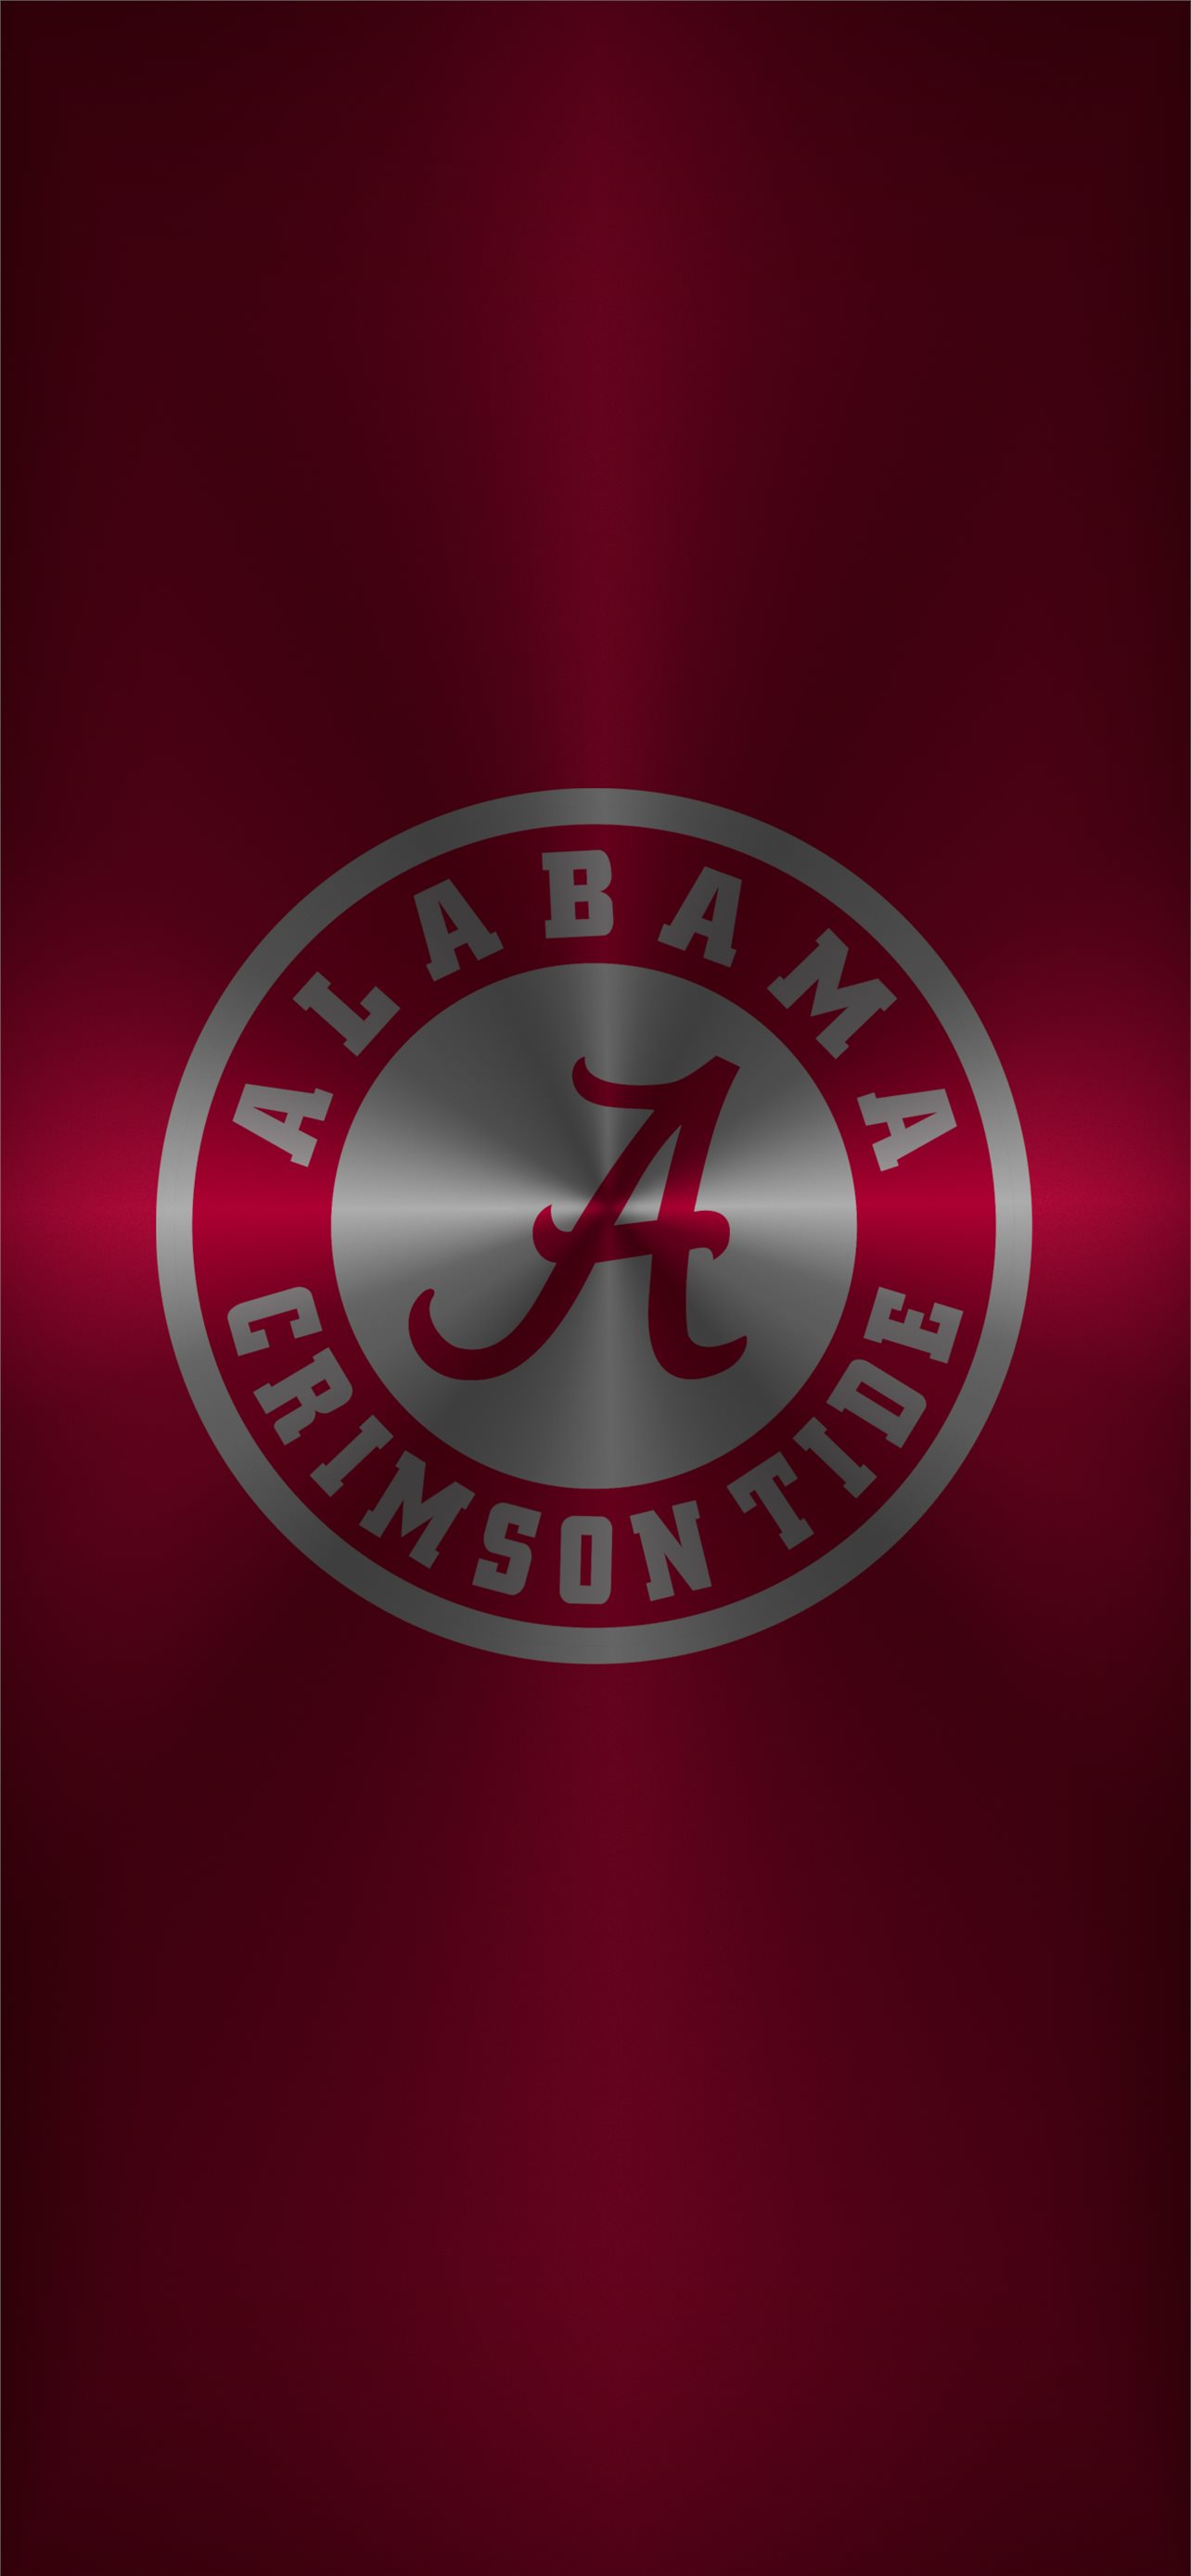 Download Get Fired Up with the Crimson Tide Alabama Football on iPhone  Wallpaper  Wallpaperscom